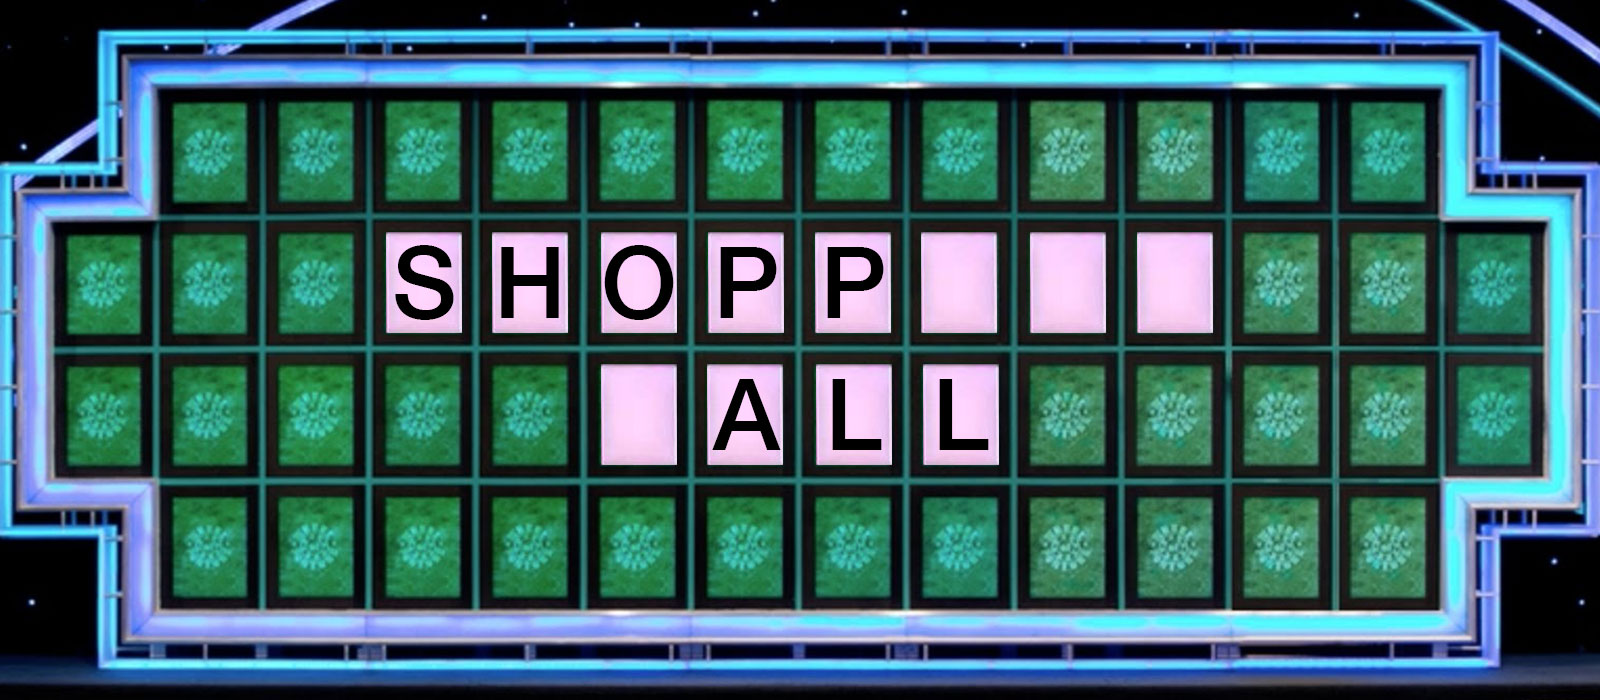 Can You Solve These Wheel of Fortune Puzzles? Quiz 715